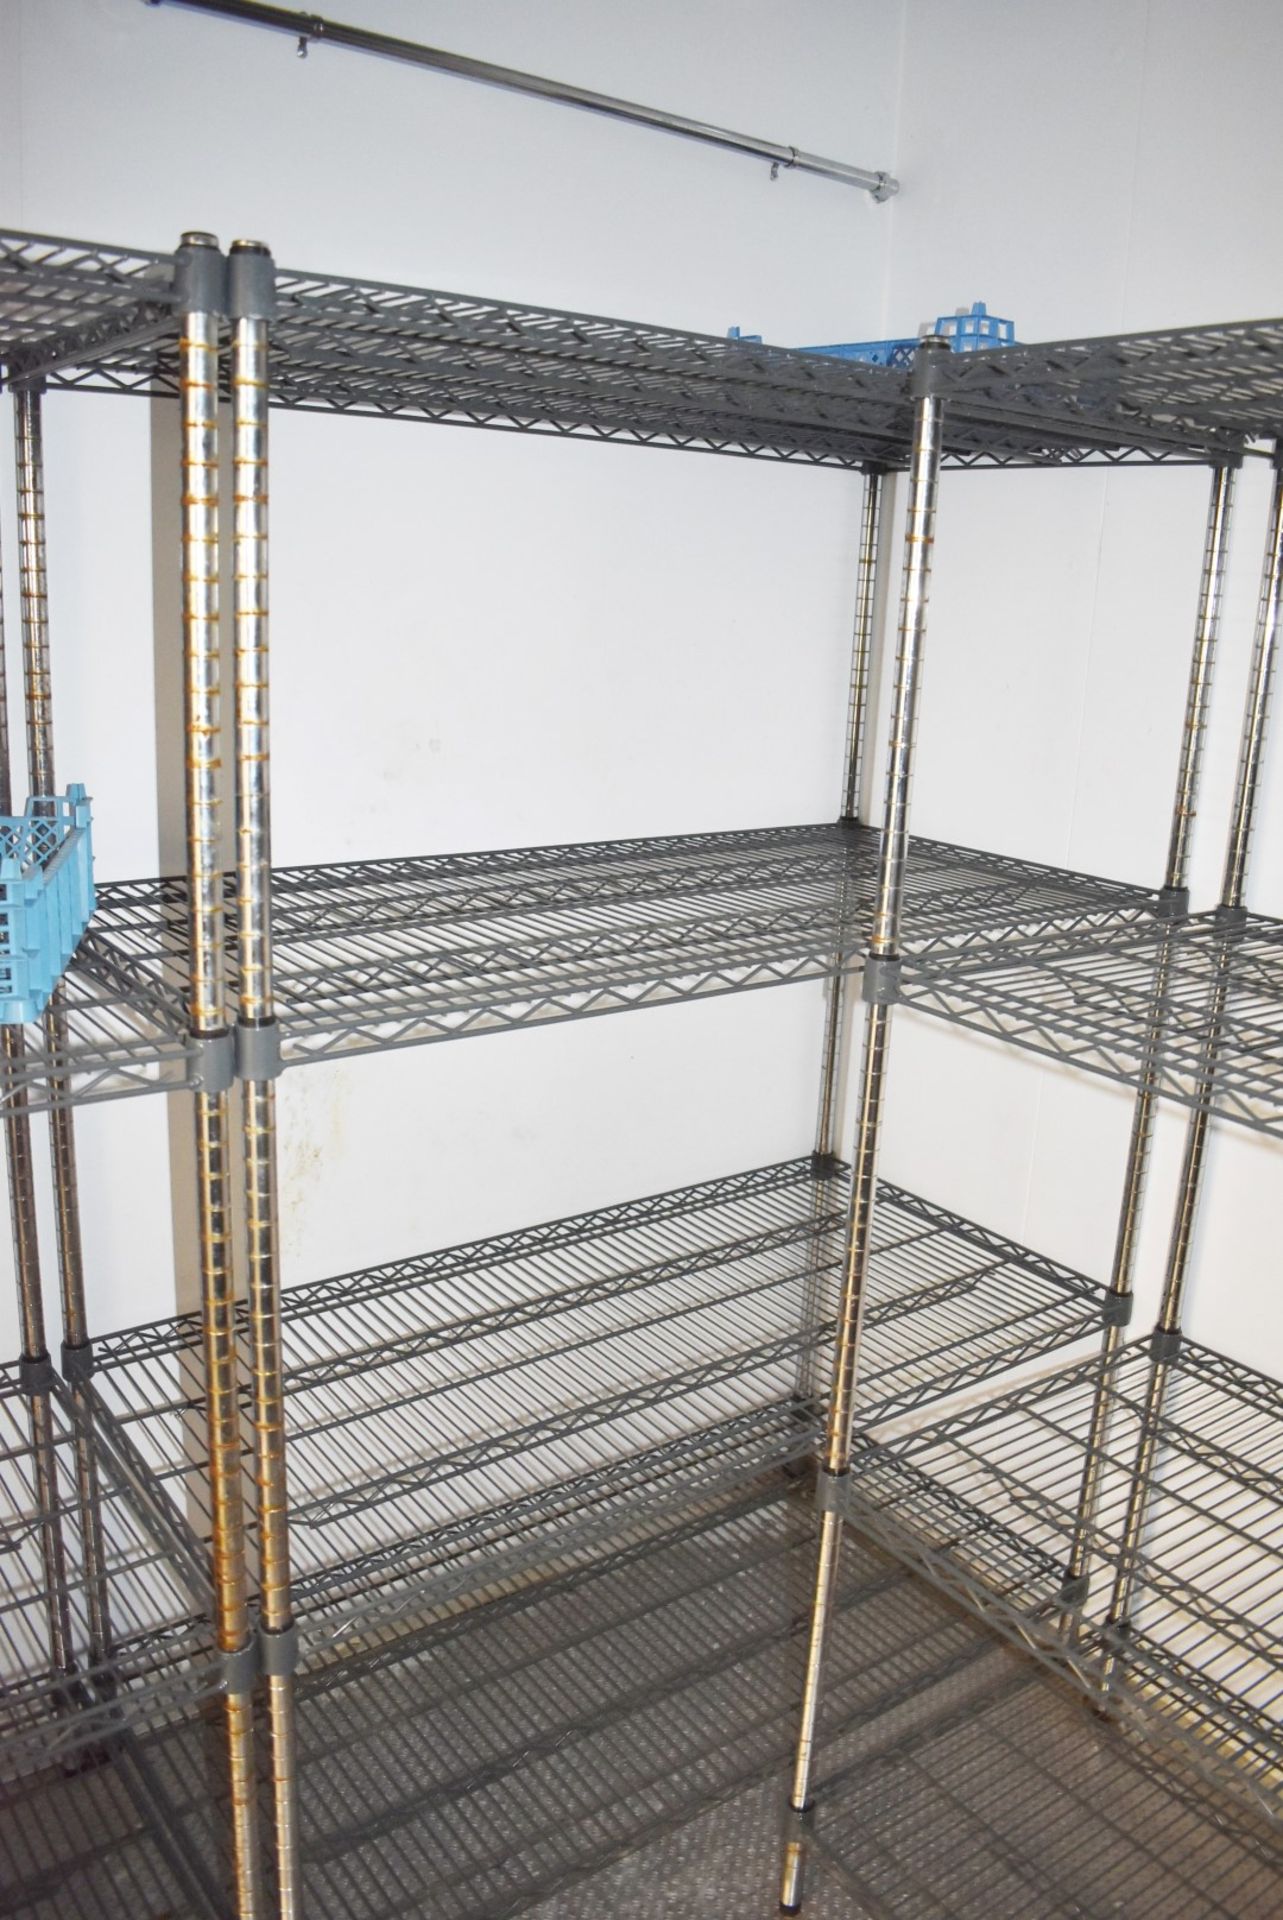 5 x Assorted Cold Room Wire Storage Shelf Units With Coated Shelves - H168 x W90-124 x D60 cms - Image 2 of 9